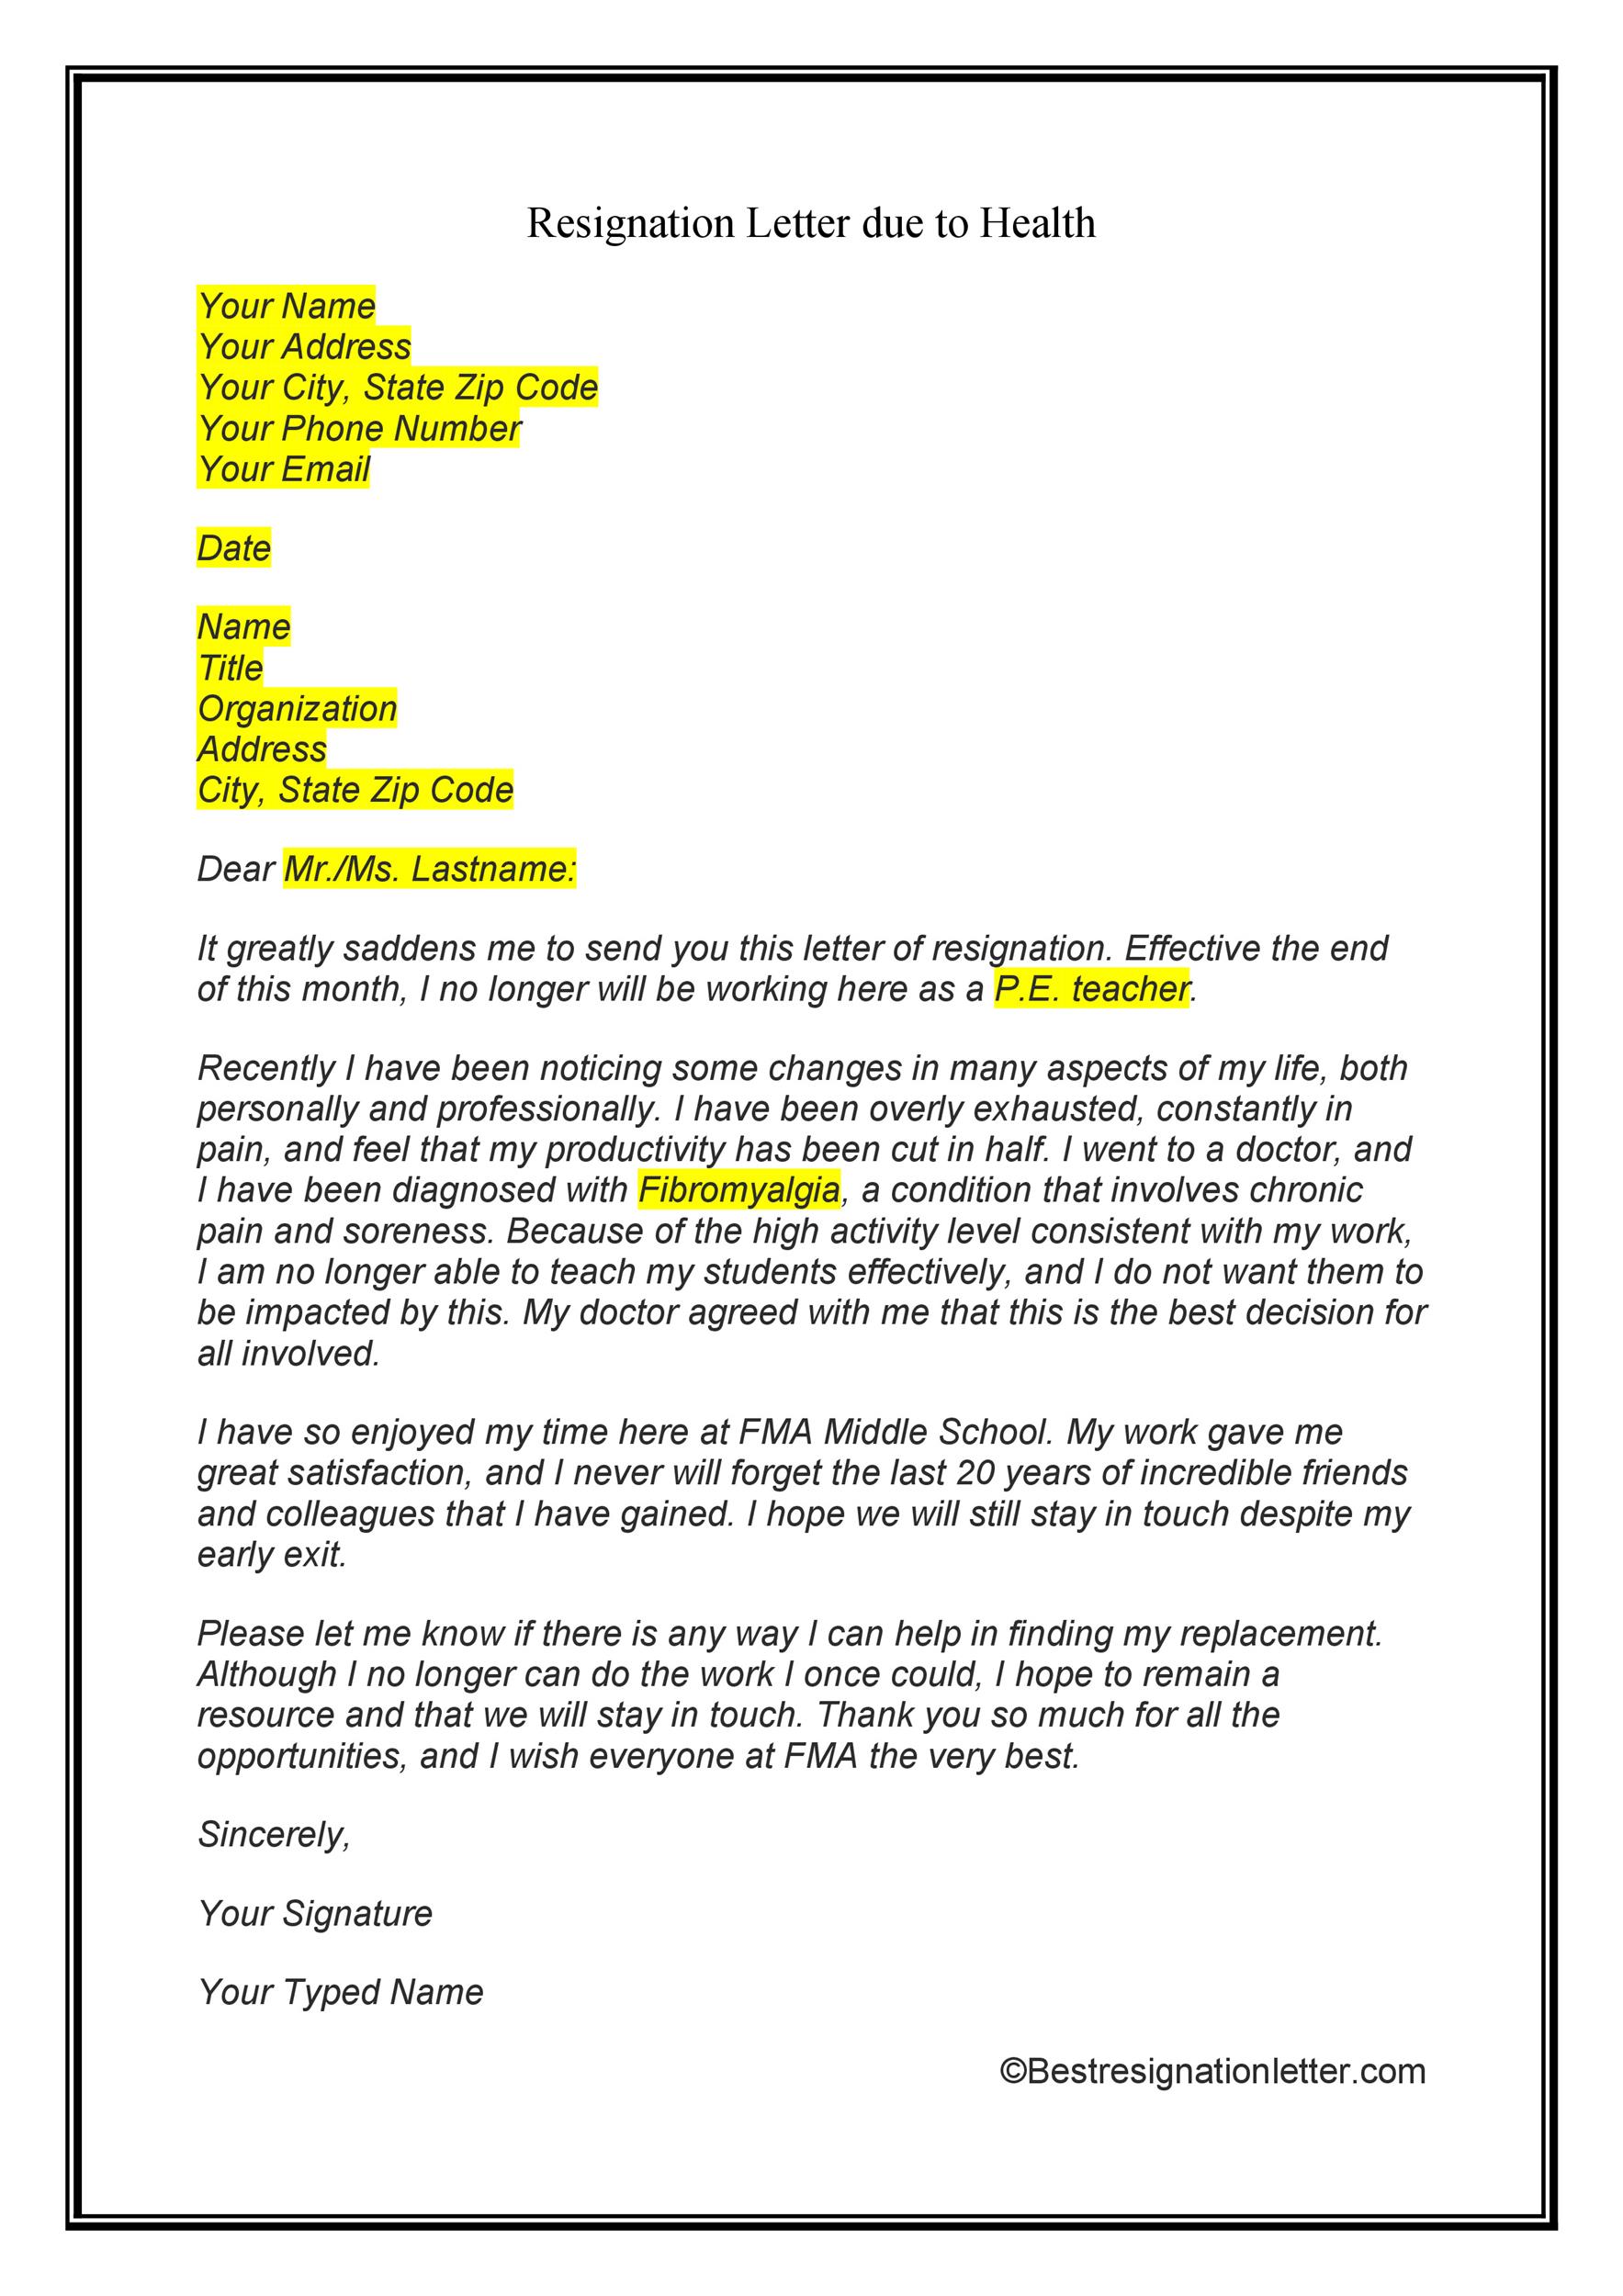 Resignation Letter For Health Reasons Pdf from templatelab.com